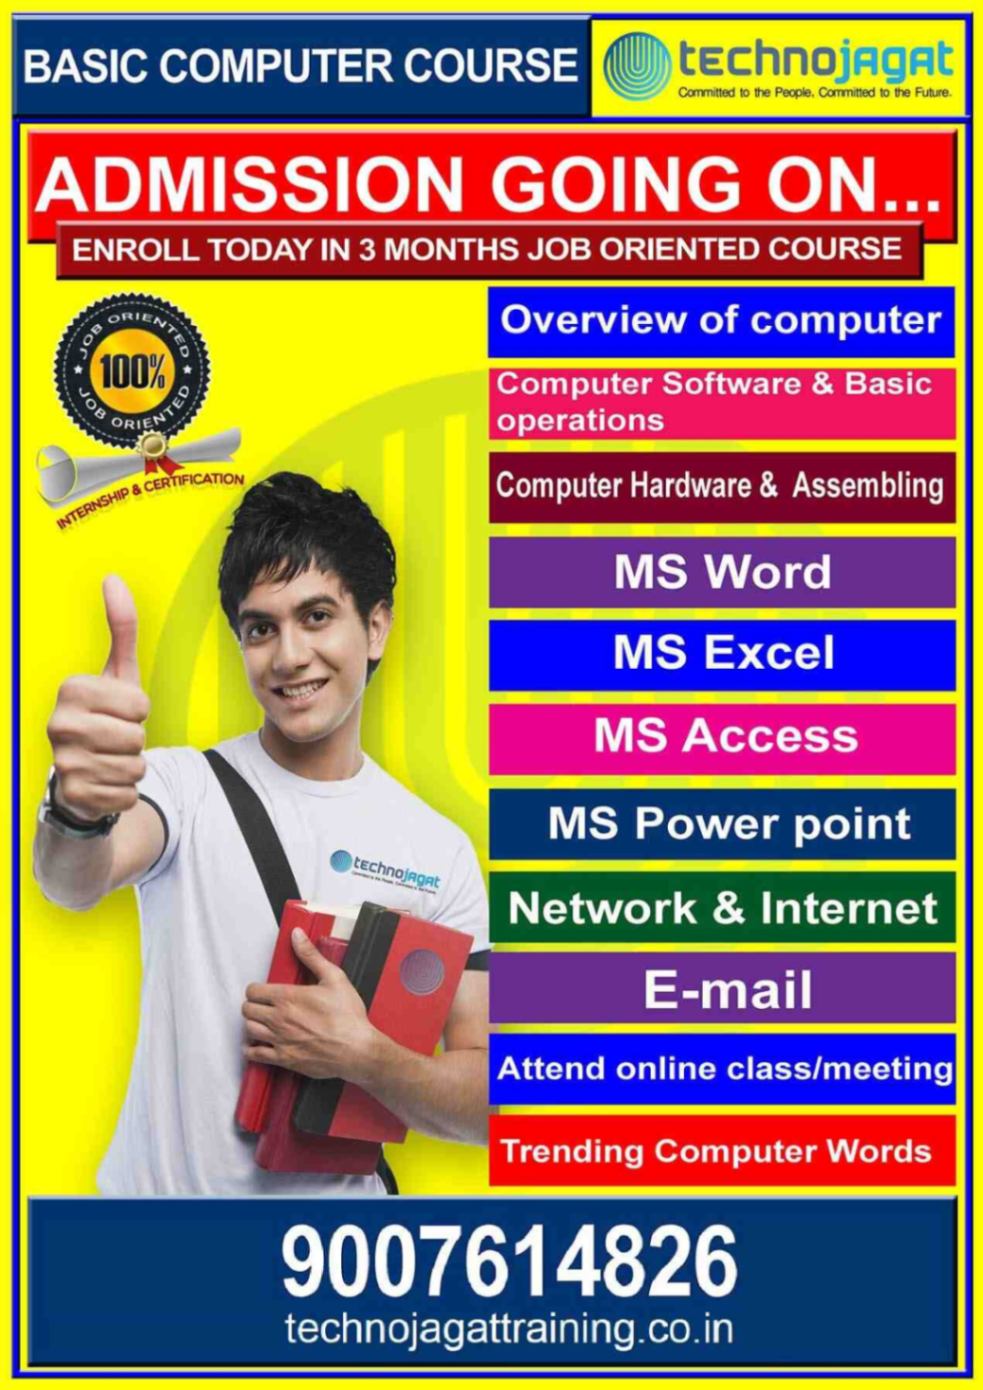 Basic Computer Course in Kolkata: Master Essential Skills Today ,call 9007614826